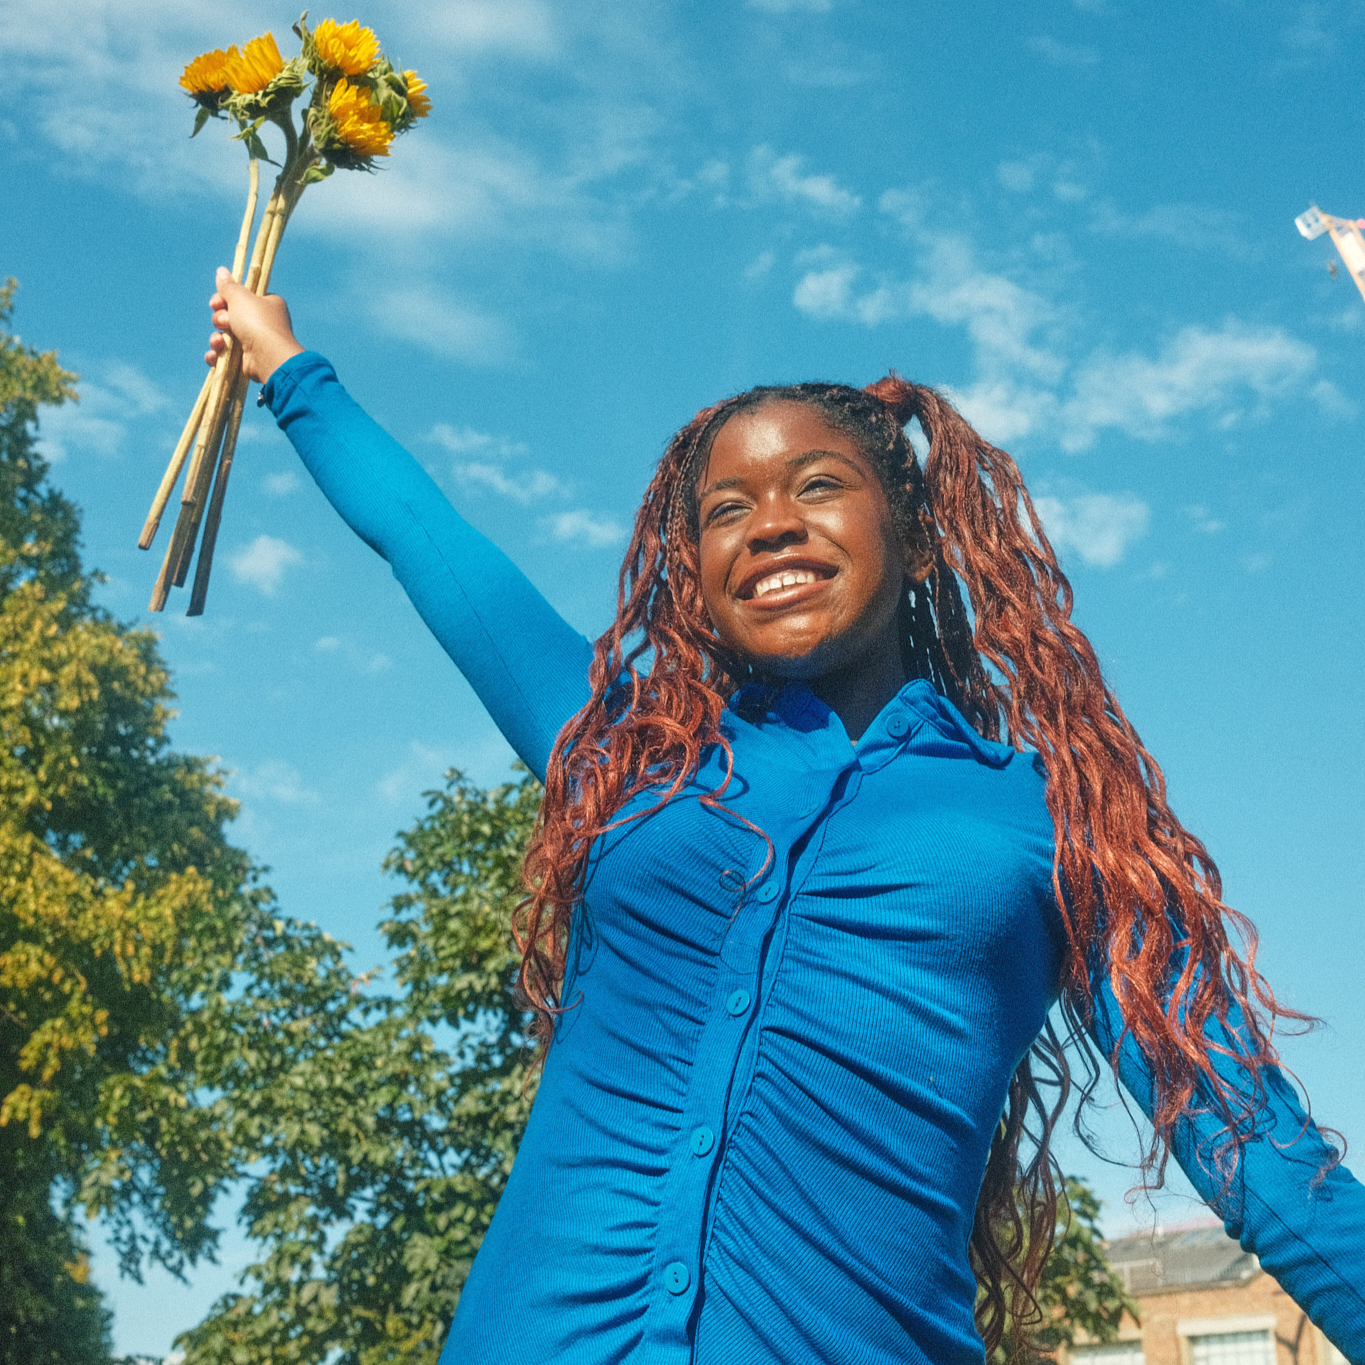 girl holding sunflowers in the air with a beaming smile